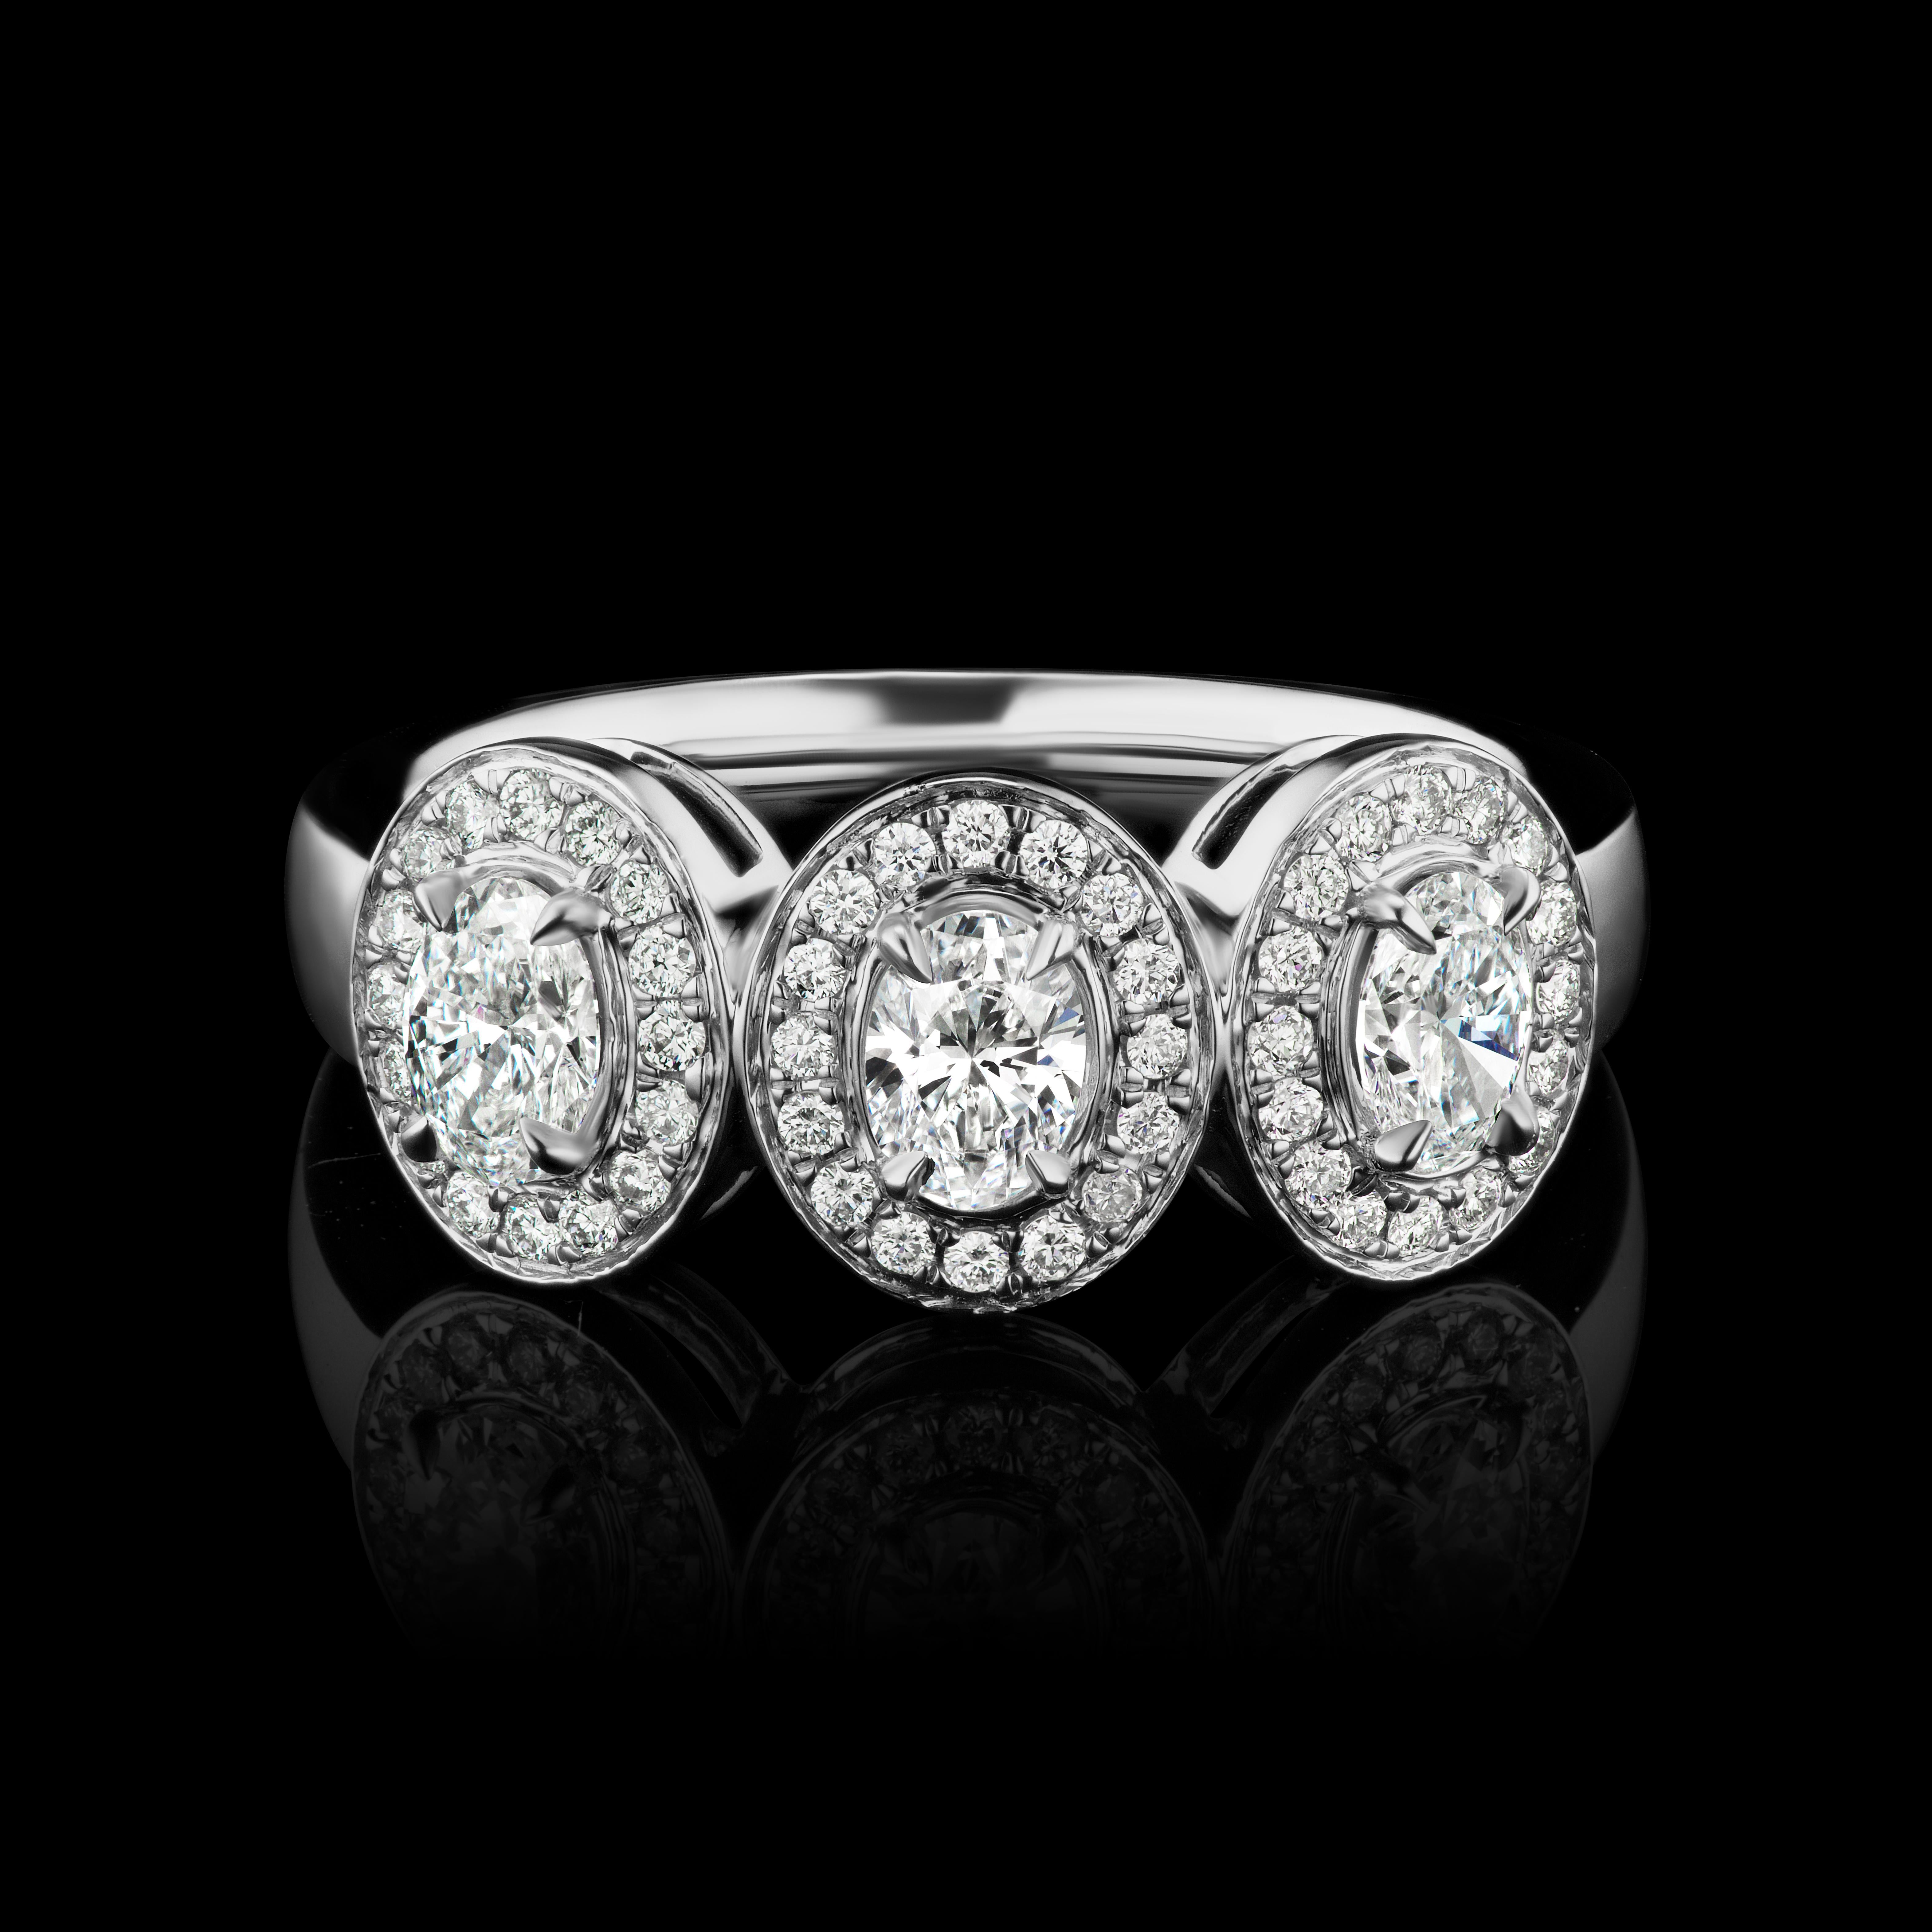 Past Present Future Three Oval Diamond Ring in 18K White Gold ( 1.55 ct. tw. )

Classic and elegant, this ring made with Three matching oval diamonds symbolizes love in a perfectly delicate all around pave diamond halo. The shank is also embellished